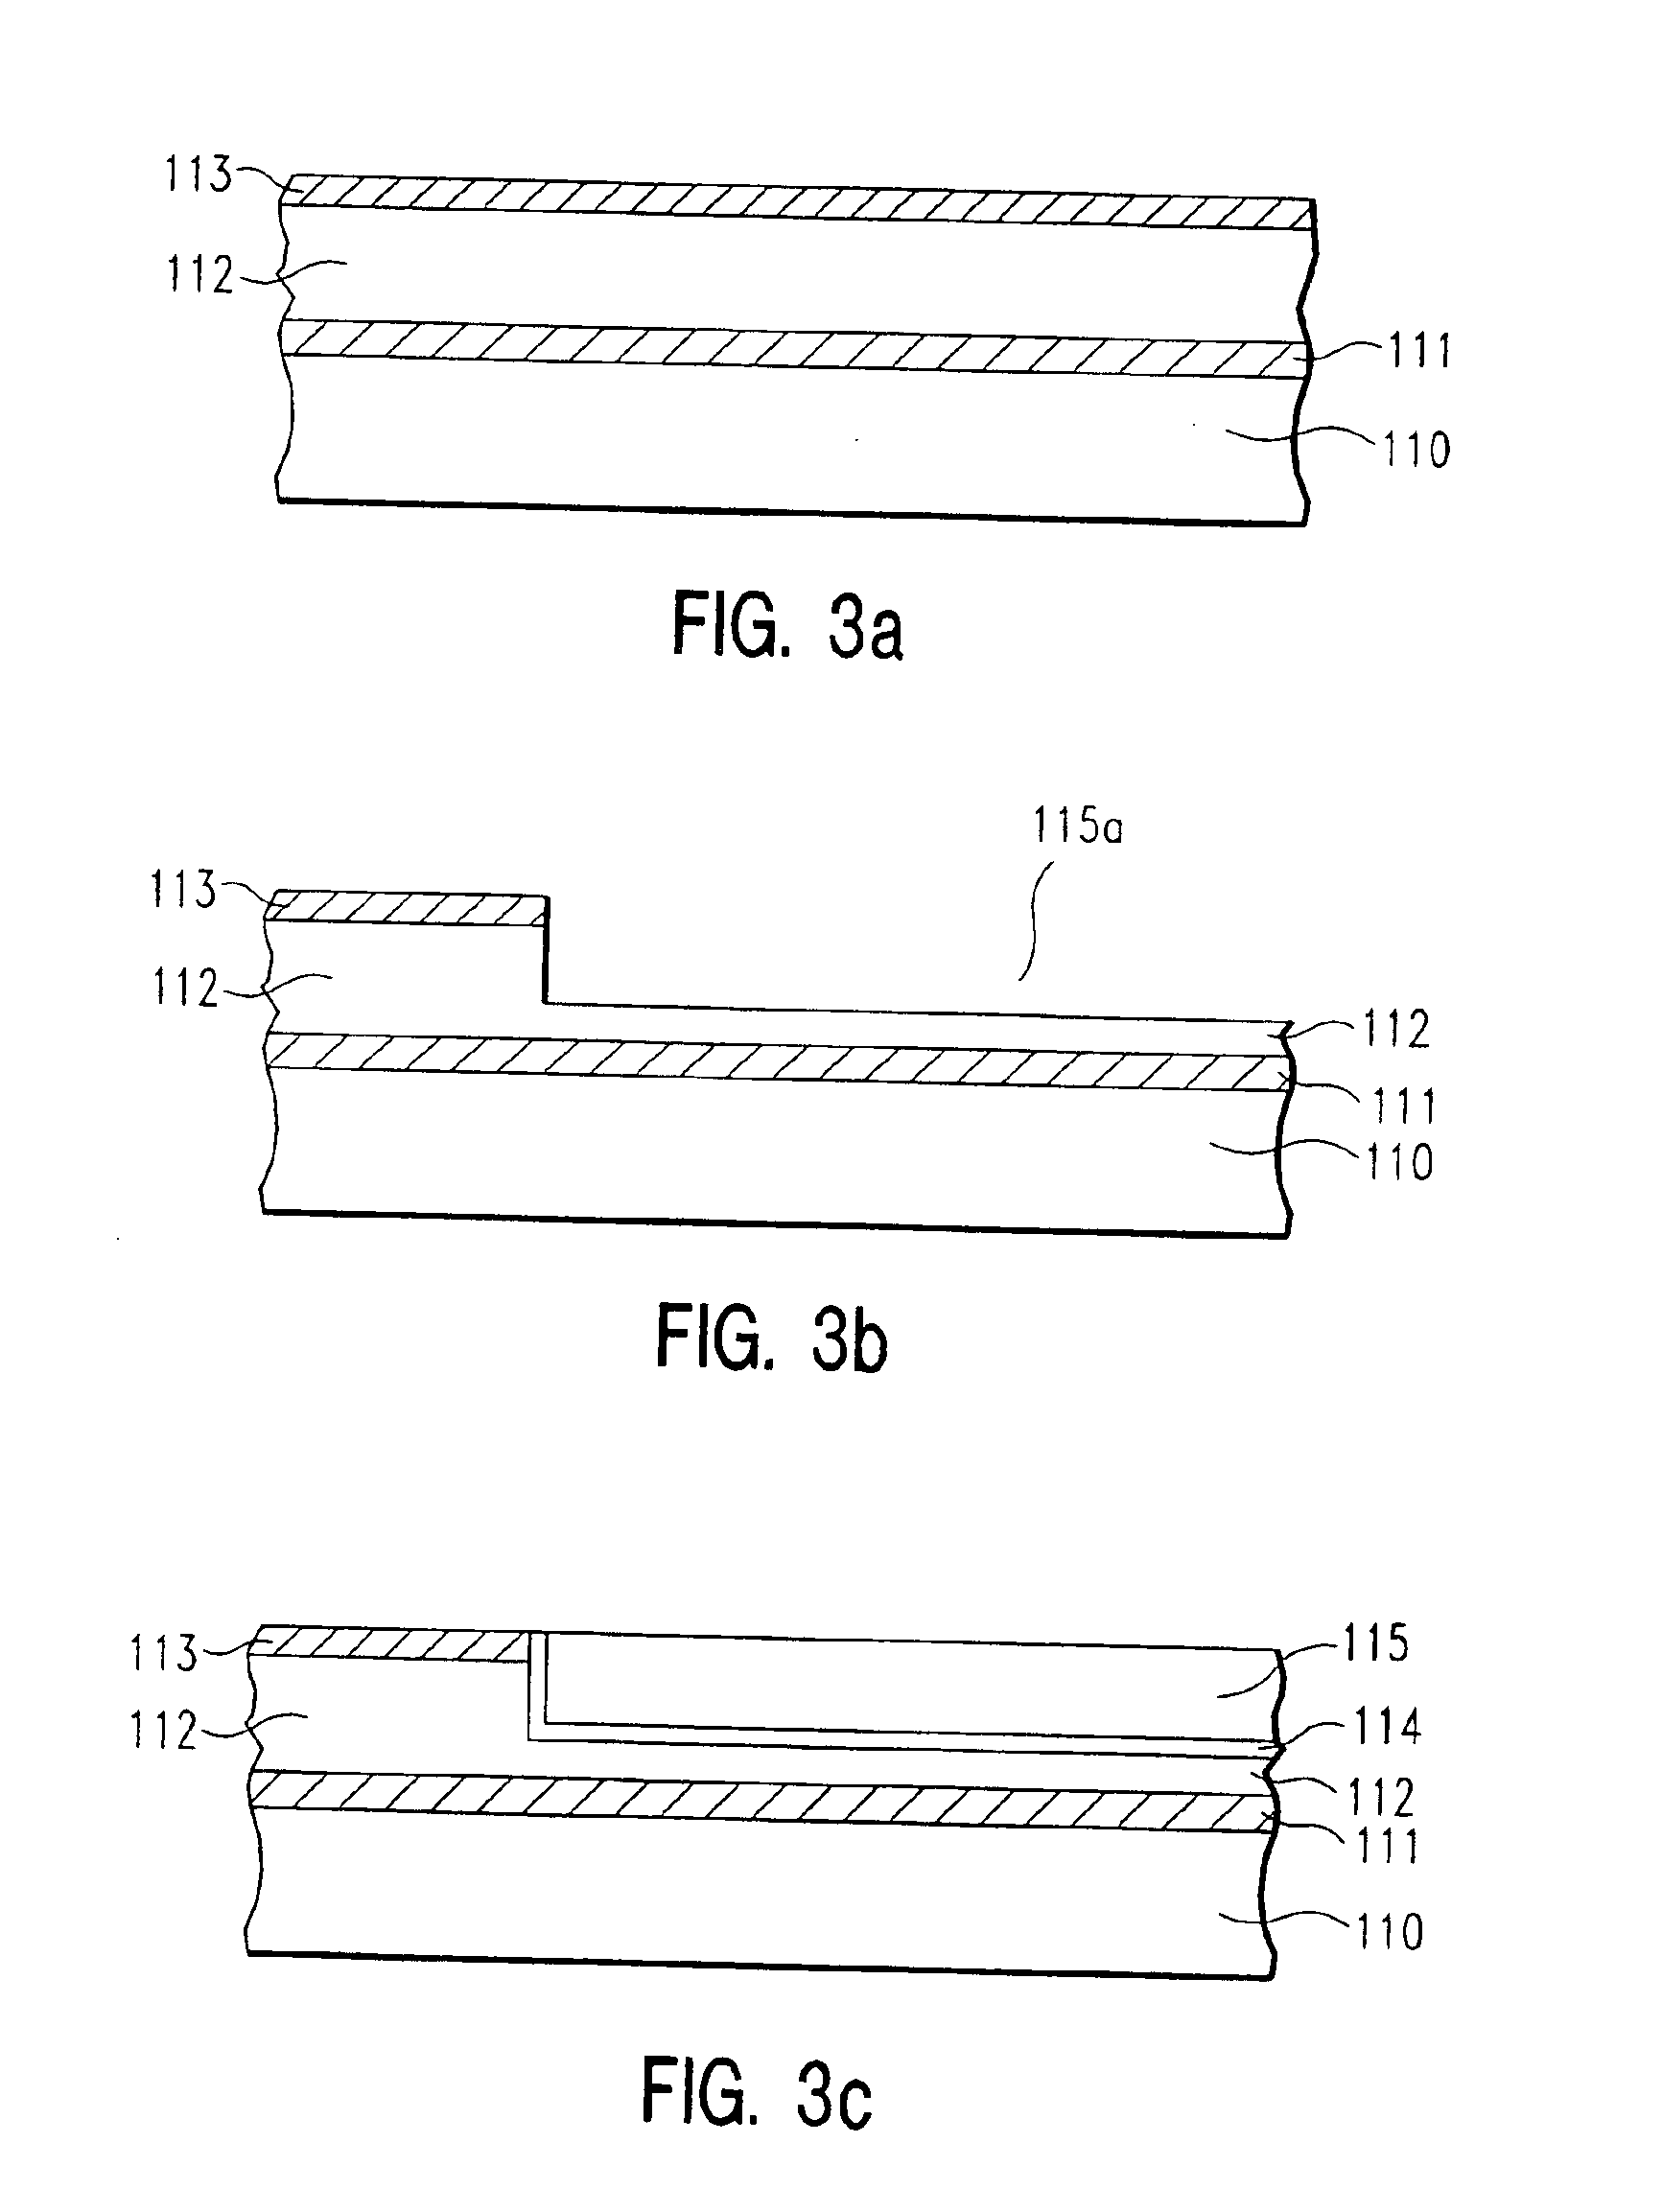 Bilayer HDP CVD/PE CVD cap in advance BEOL interconnect structures and method thereof